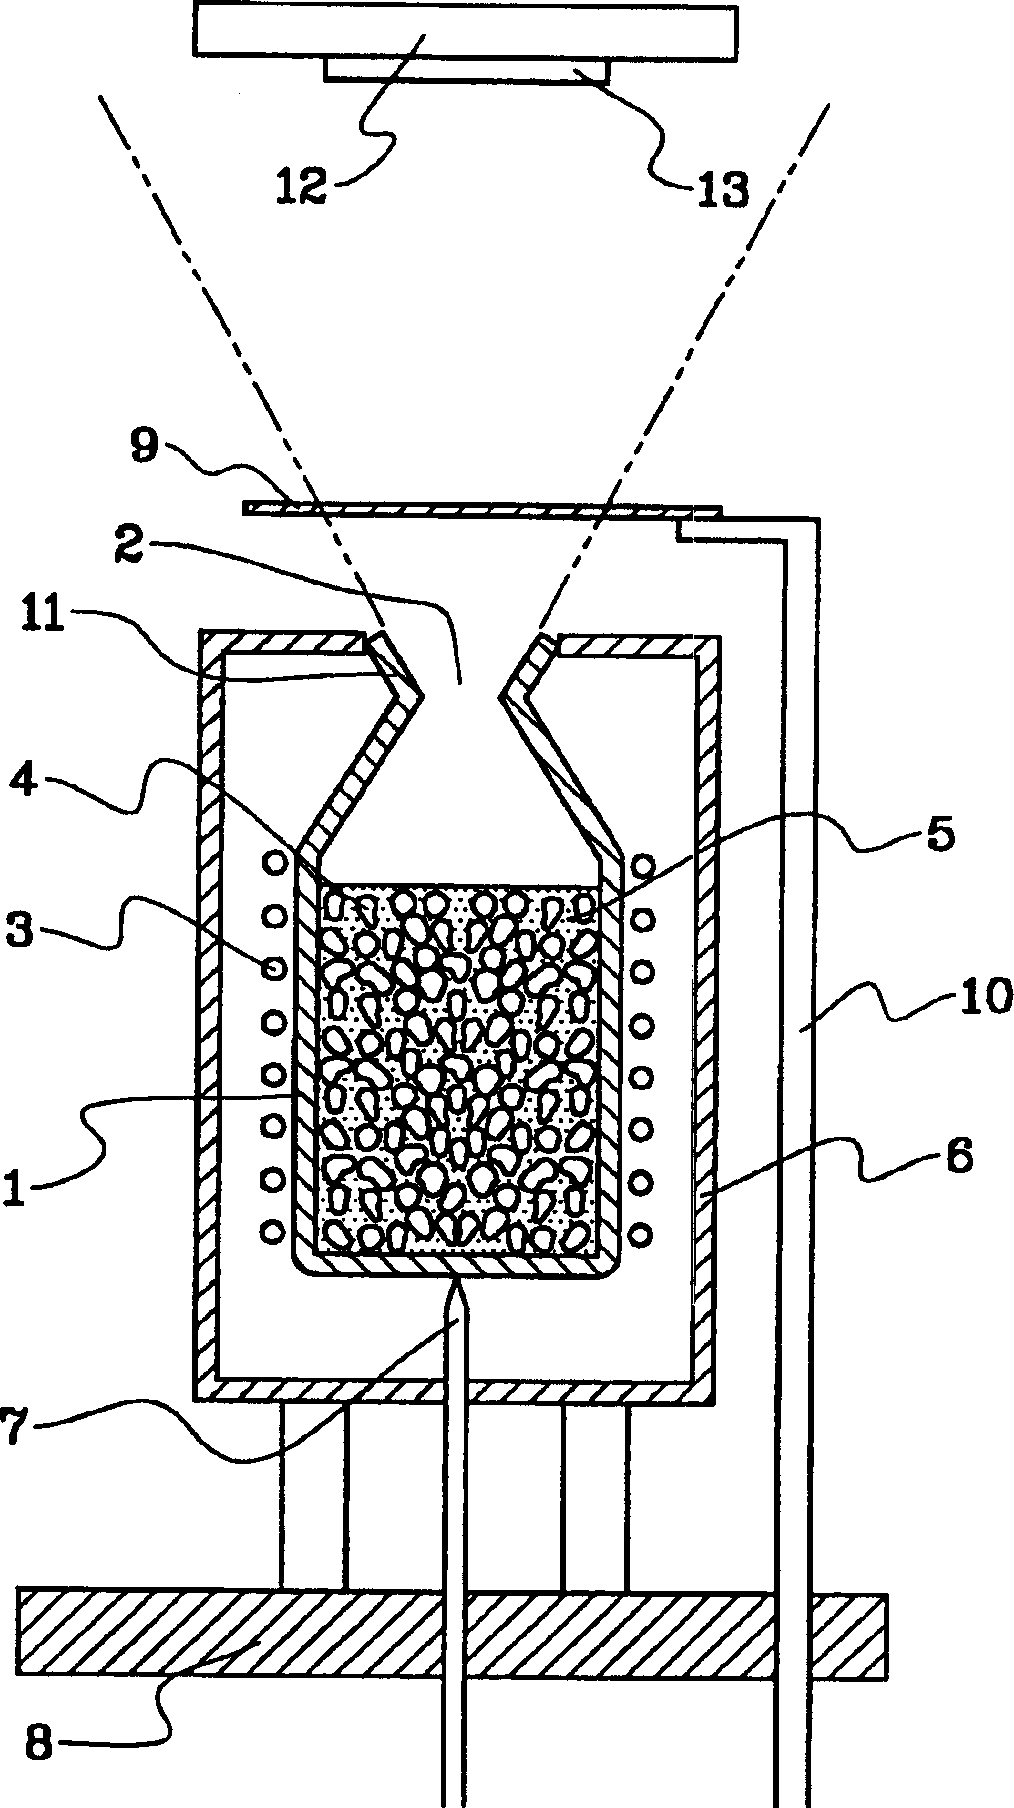 Molecular beam source apparatus for film deposition and method for depositing film by molecular beam